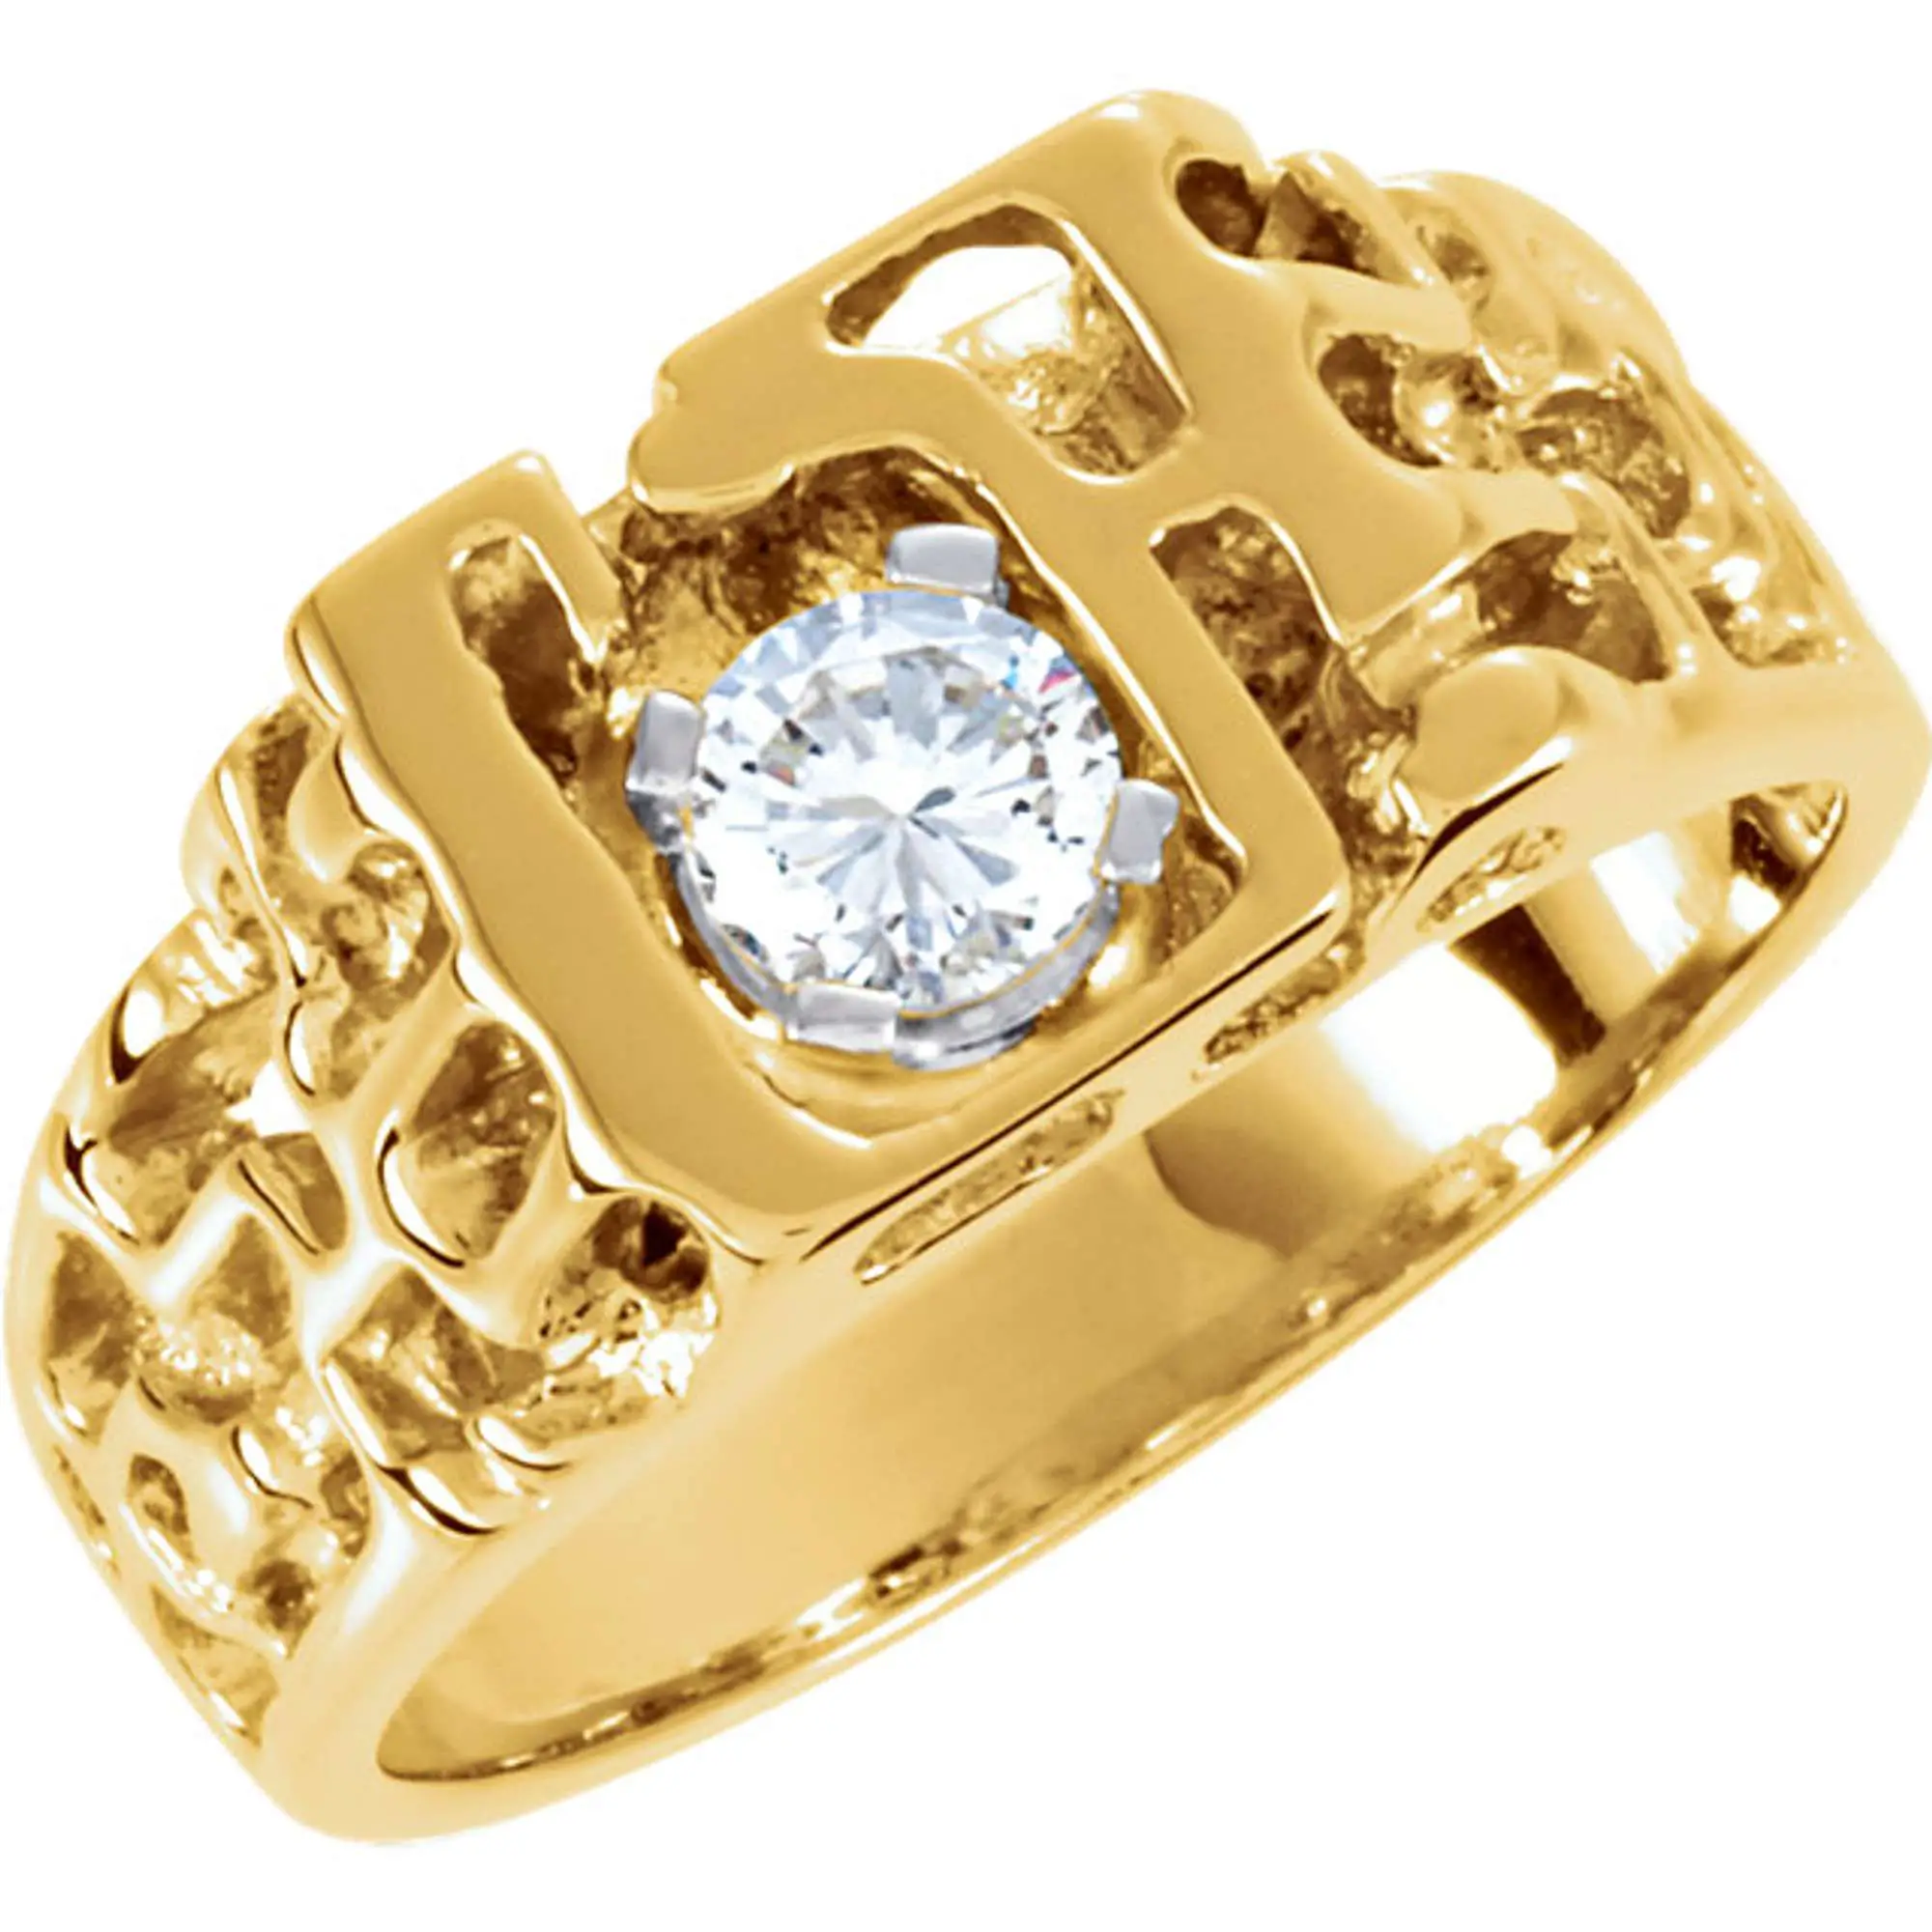 14k Yellow Gold Mens Nugget Solitaire Diamond Ring Band 1/2 ctw ...